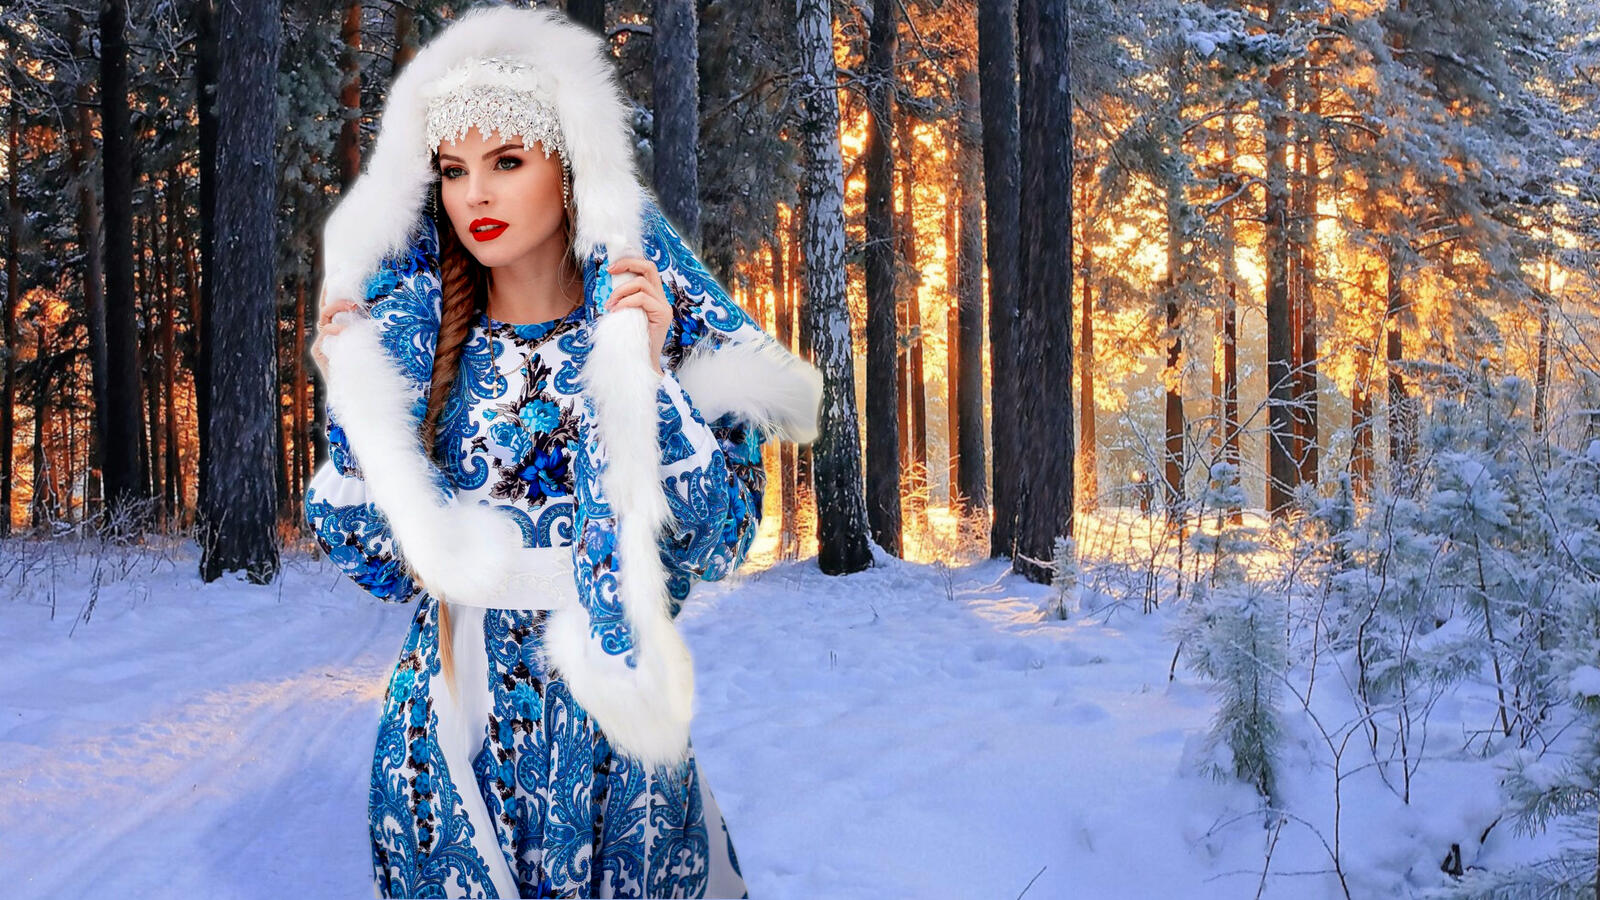 Wallpapers new year winter snow maiden on the desktop